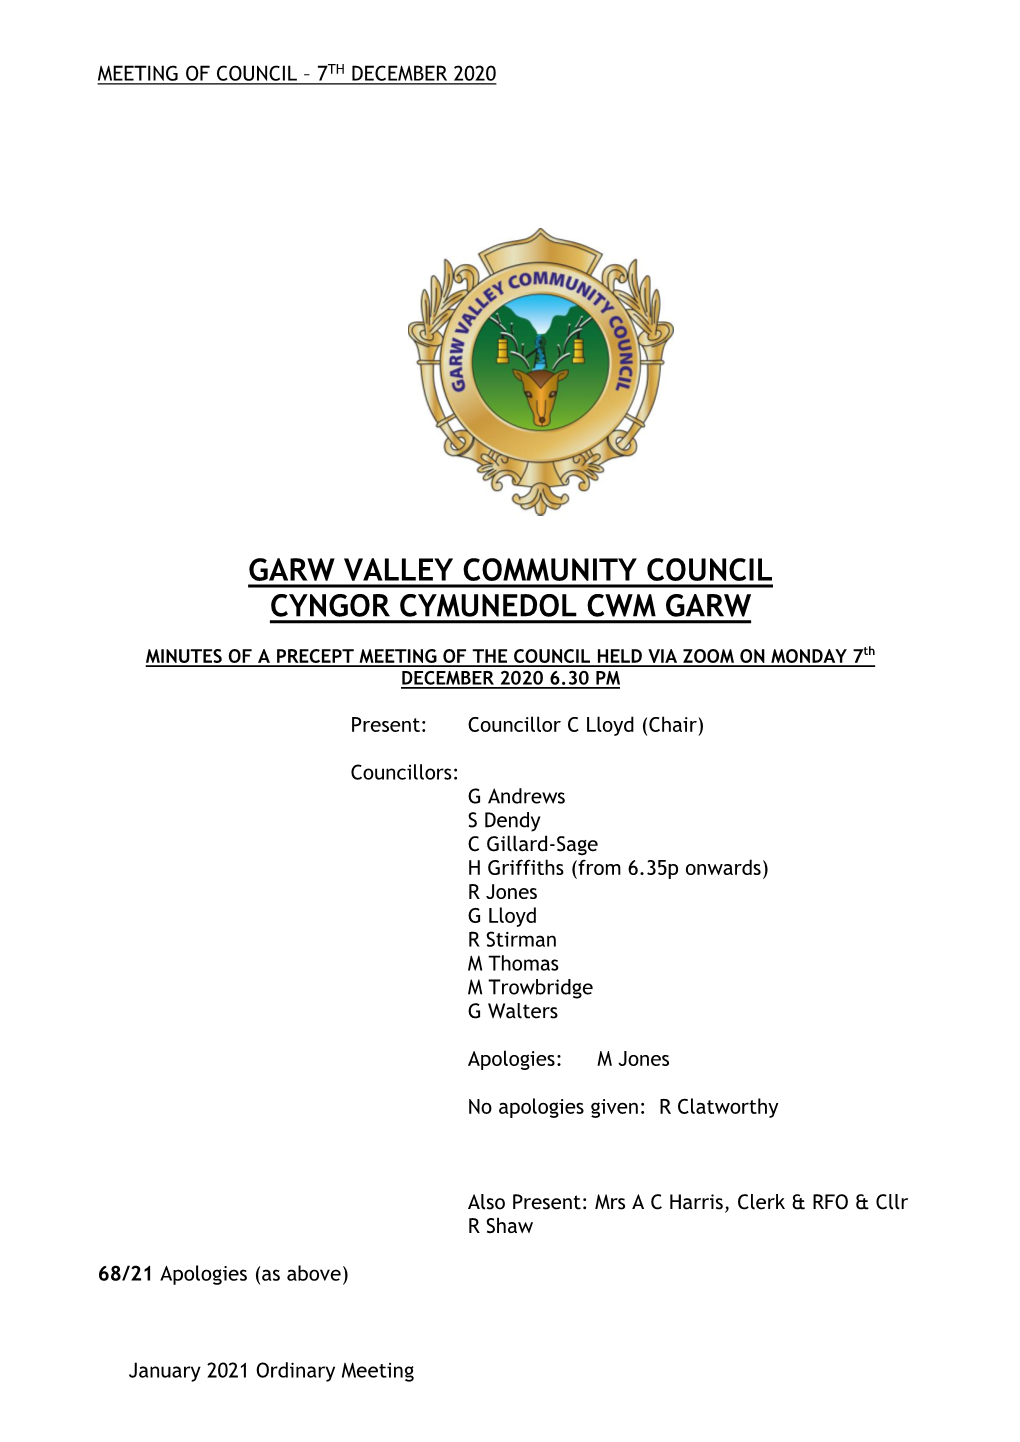 Coity Higher Community Council